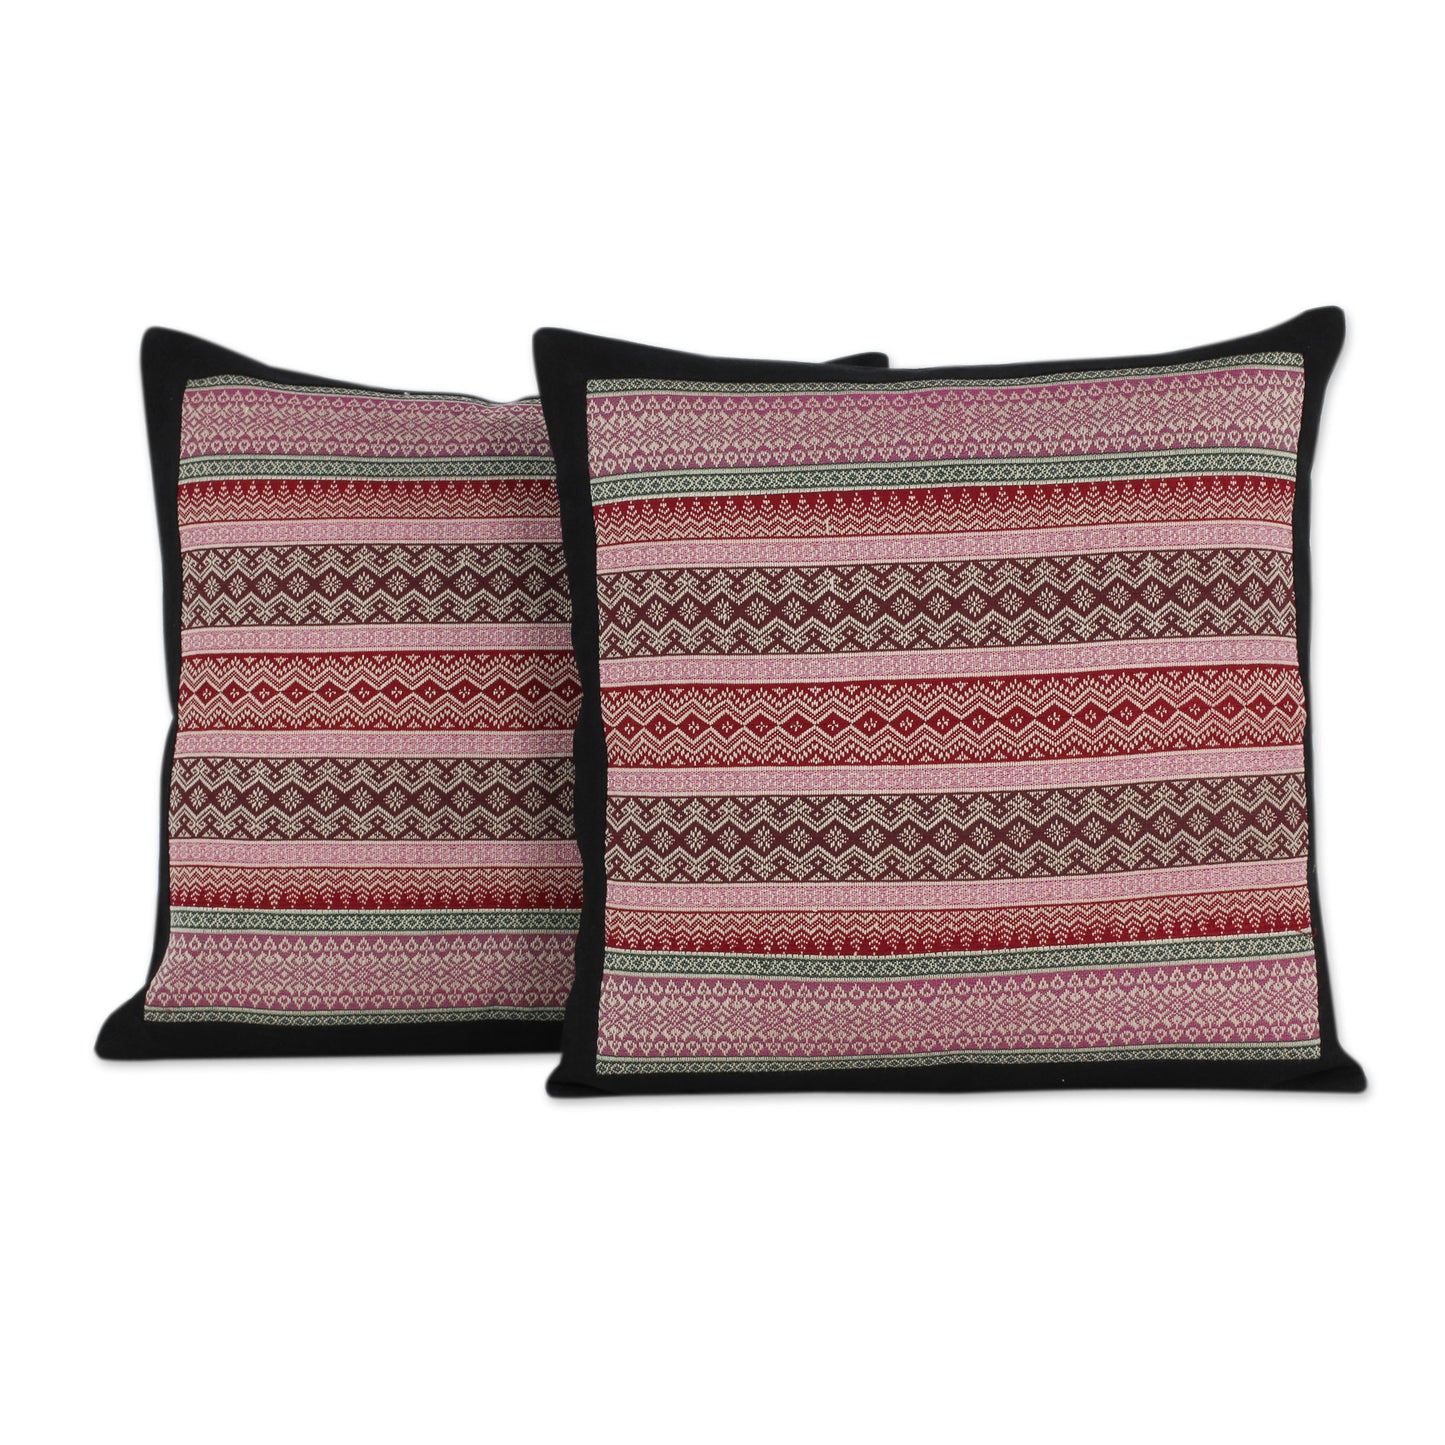 Enchanted Thai Orchids Handwoven Thai Cushion Covers in Pink and Red (Pair)